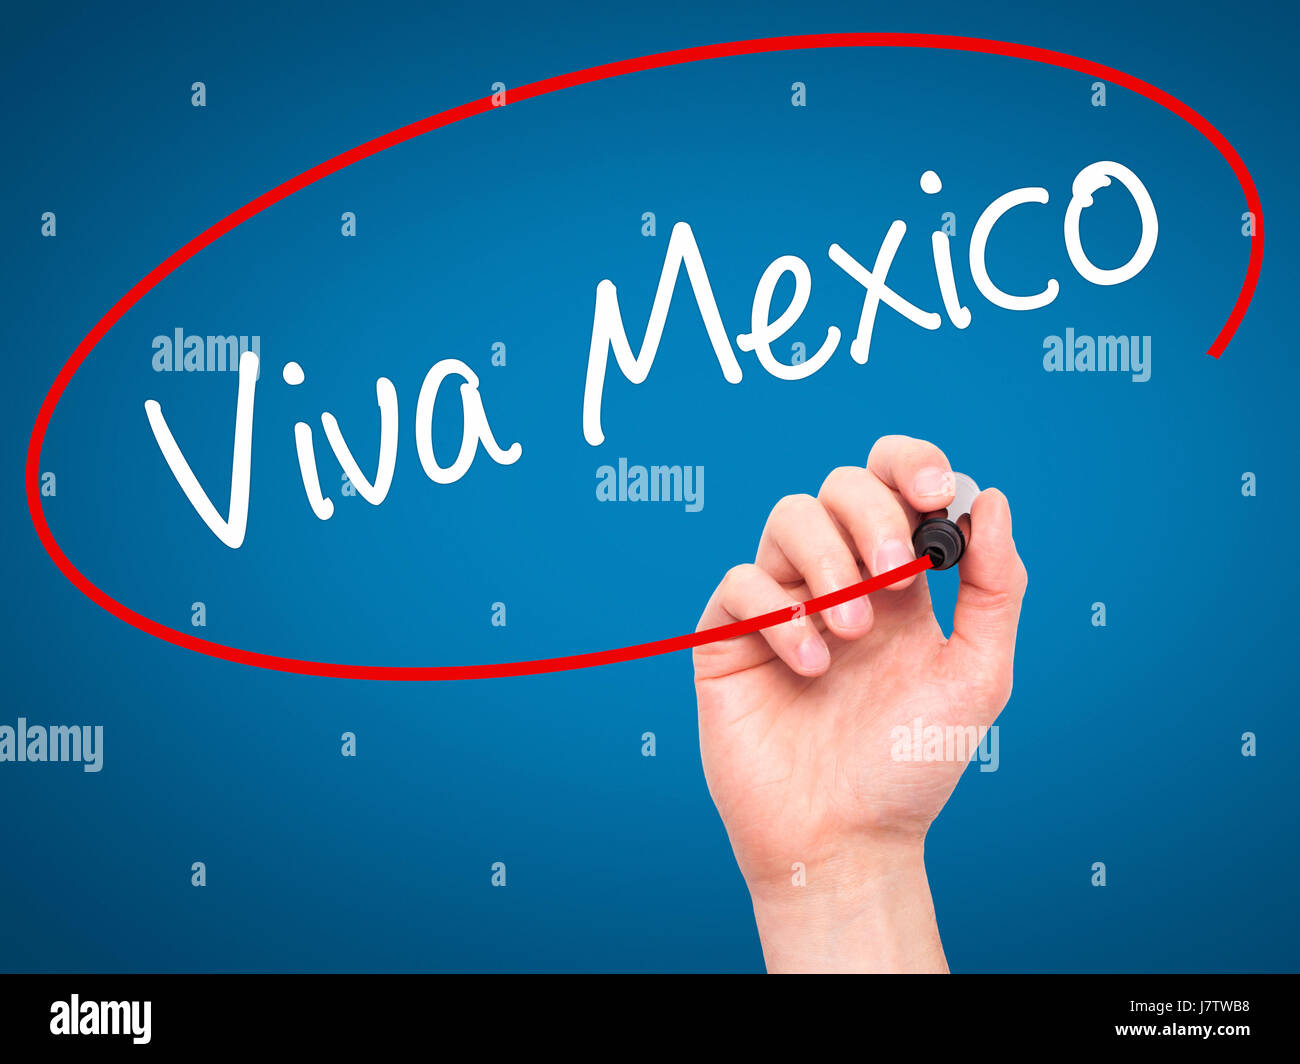 Man Hand writing Viva Mexico with black marker on visual screen. Isolated on blue. Business, technology, internet concept. Stock Photo Stock Photo